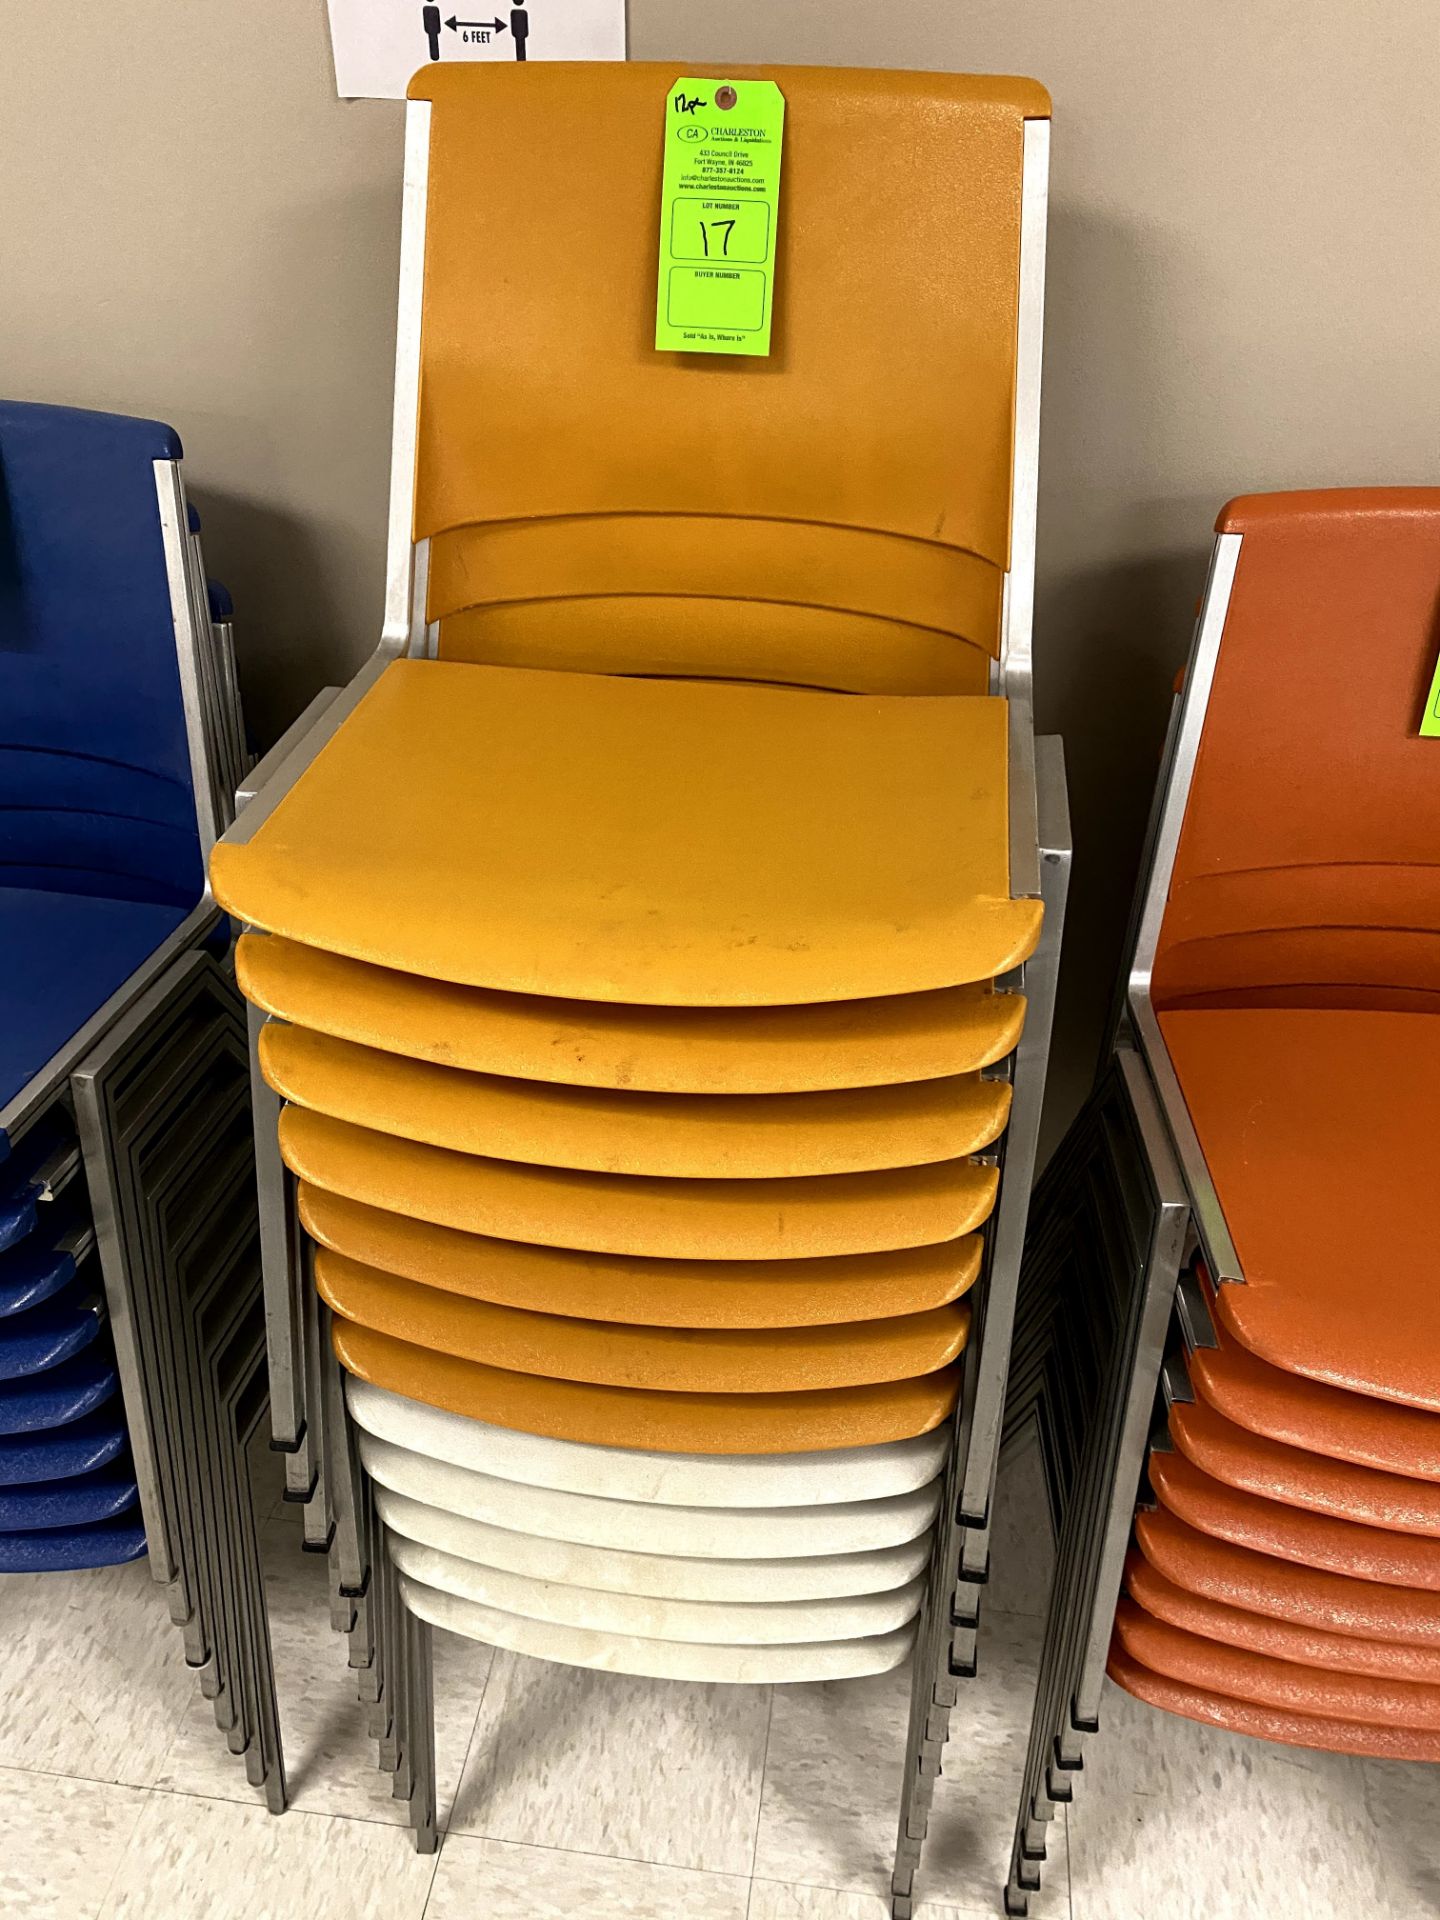 (12) YELLOW ALUMINUM STACKABLE CHAIR(S) WITH PLASTIC SEAT & BACK -- (7625 OMNITECH PLACE VICTOR